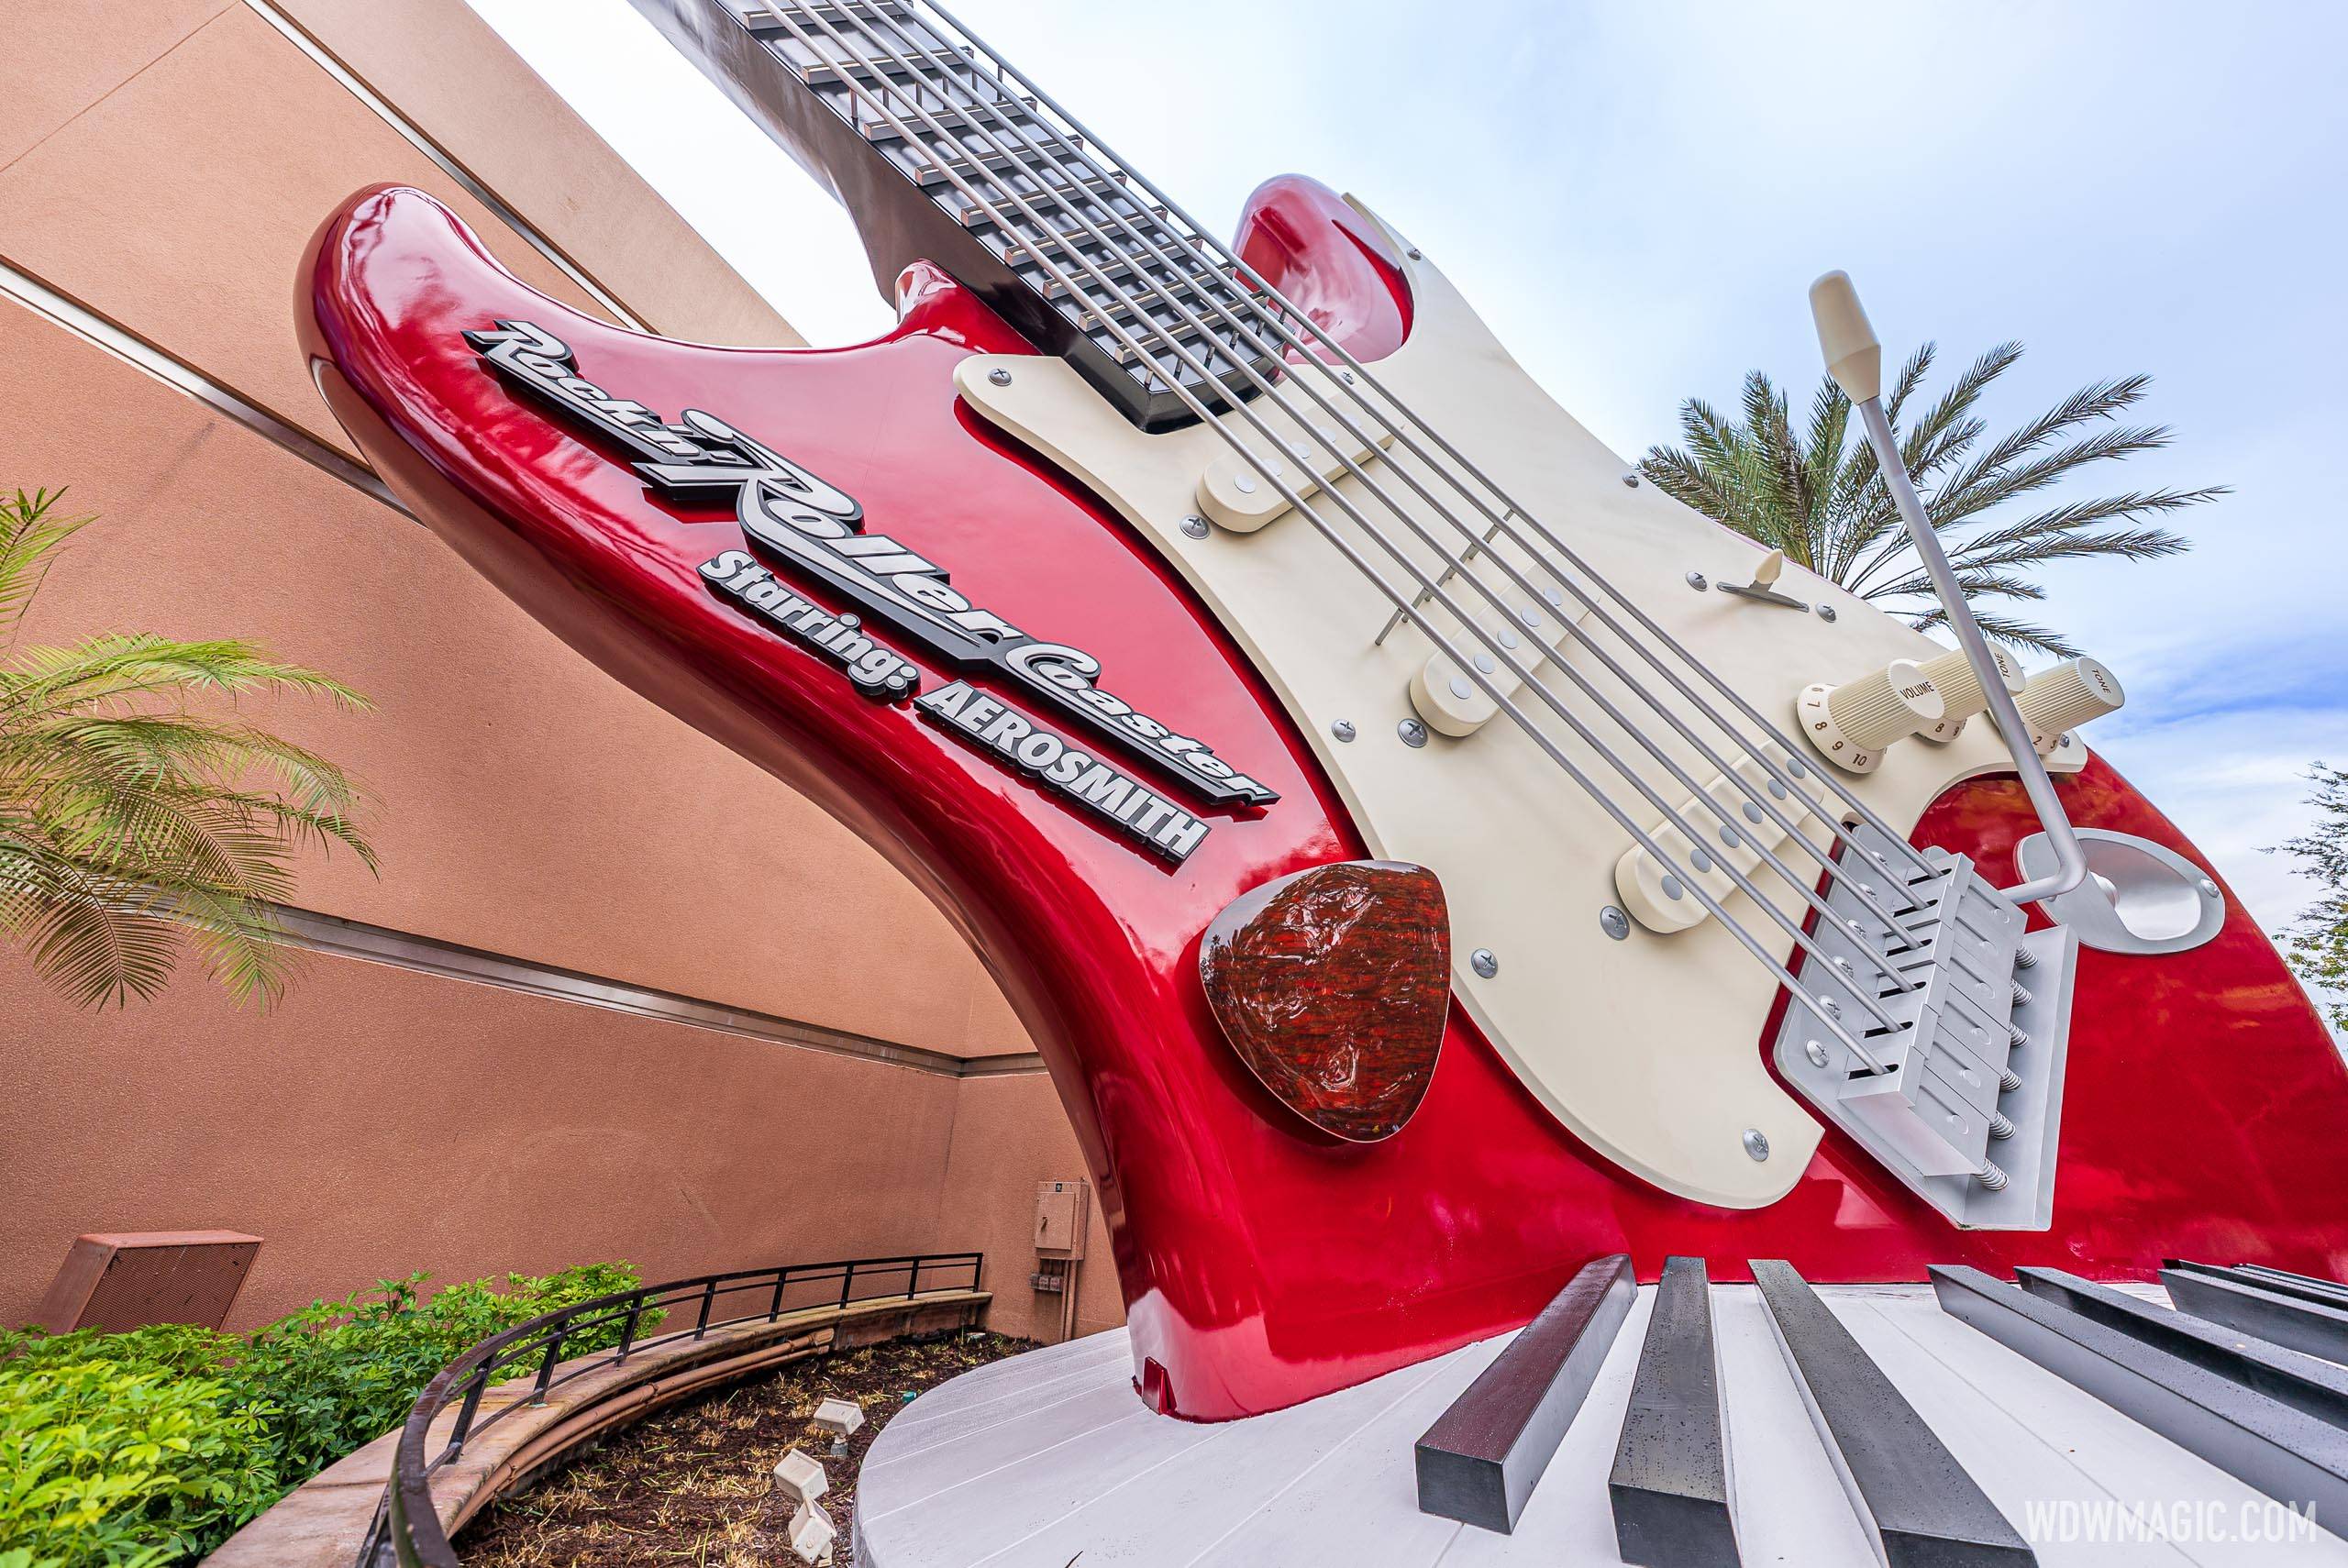 Rock 'n' Roller Coaster at Disney's Hollywood Studios is currently closed due to technical problems